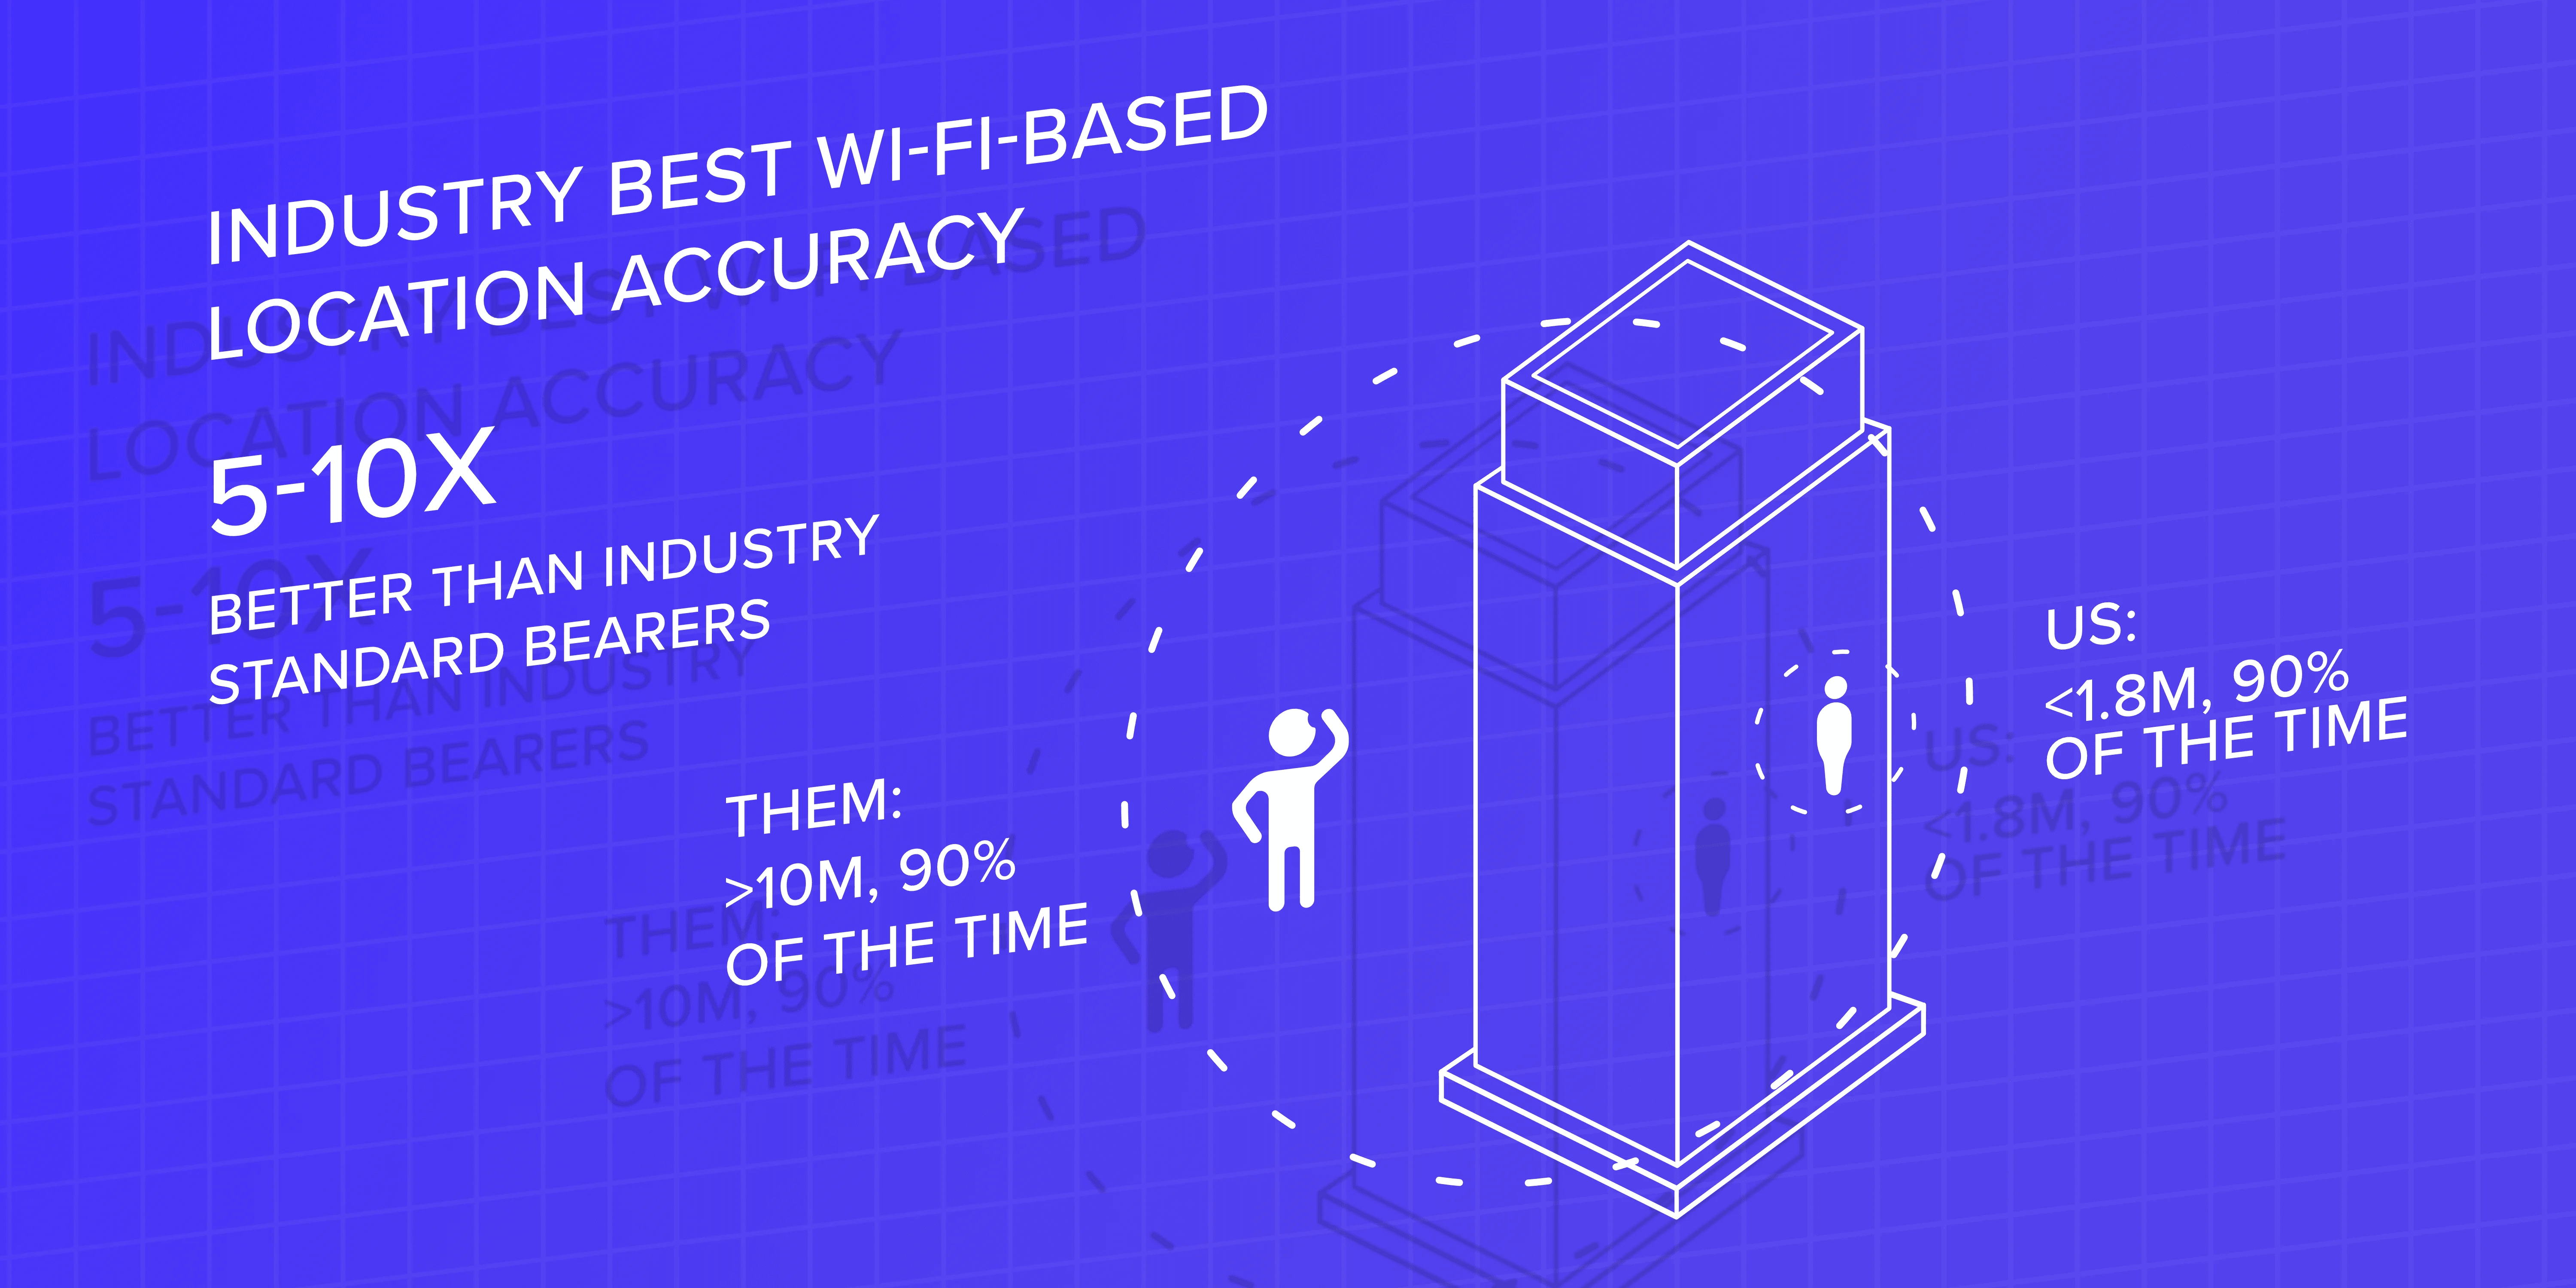 wi-fi based locations accuracy graphic